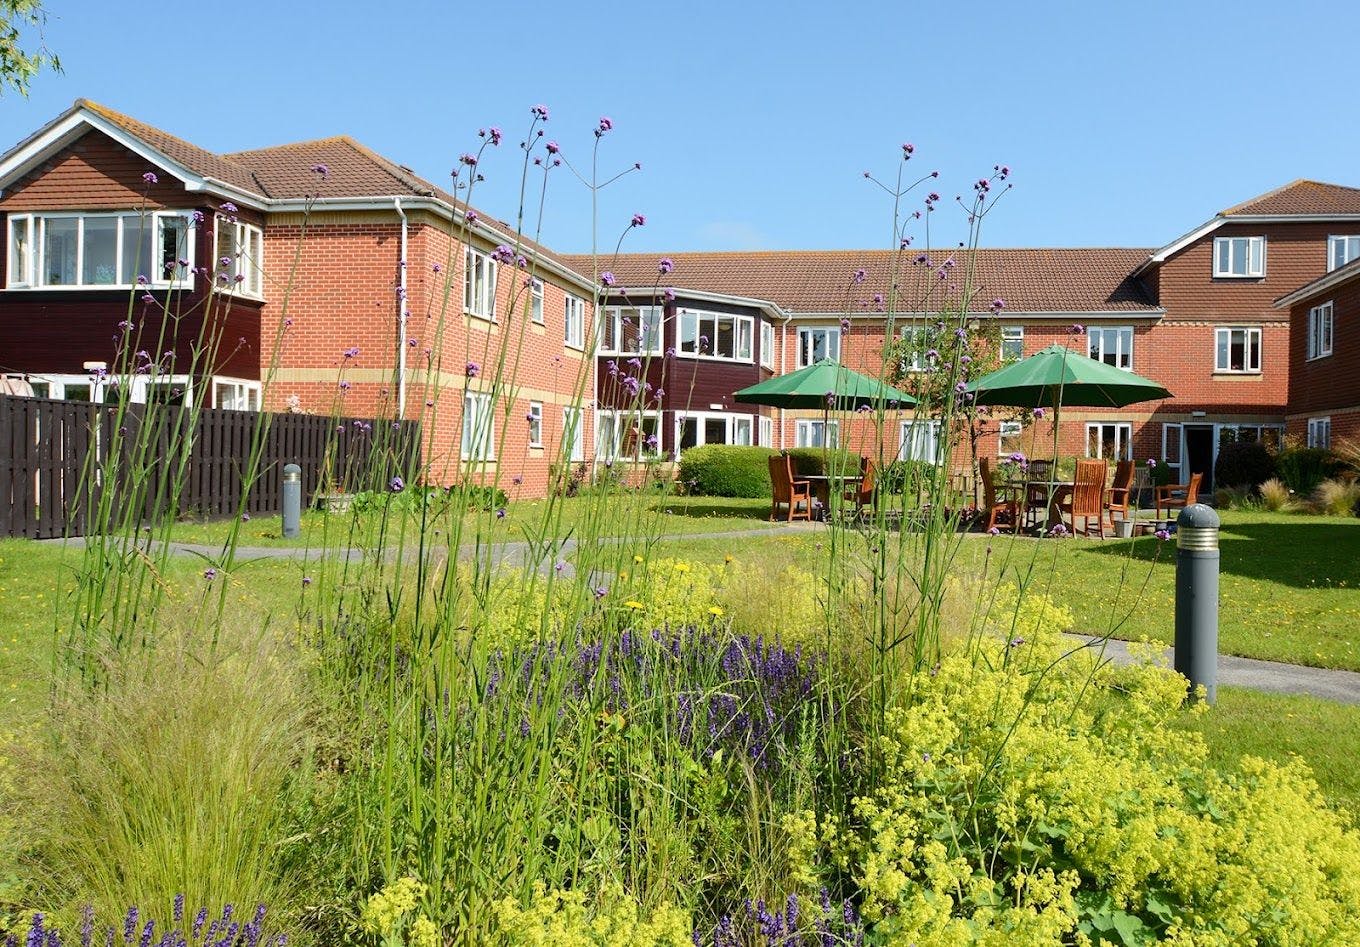 Exterior of Talbot View care home in Bournemouth, Hampshire